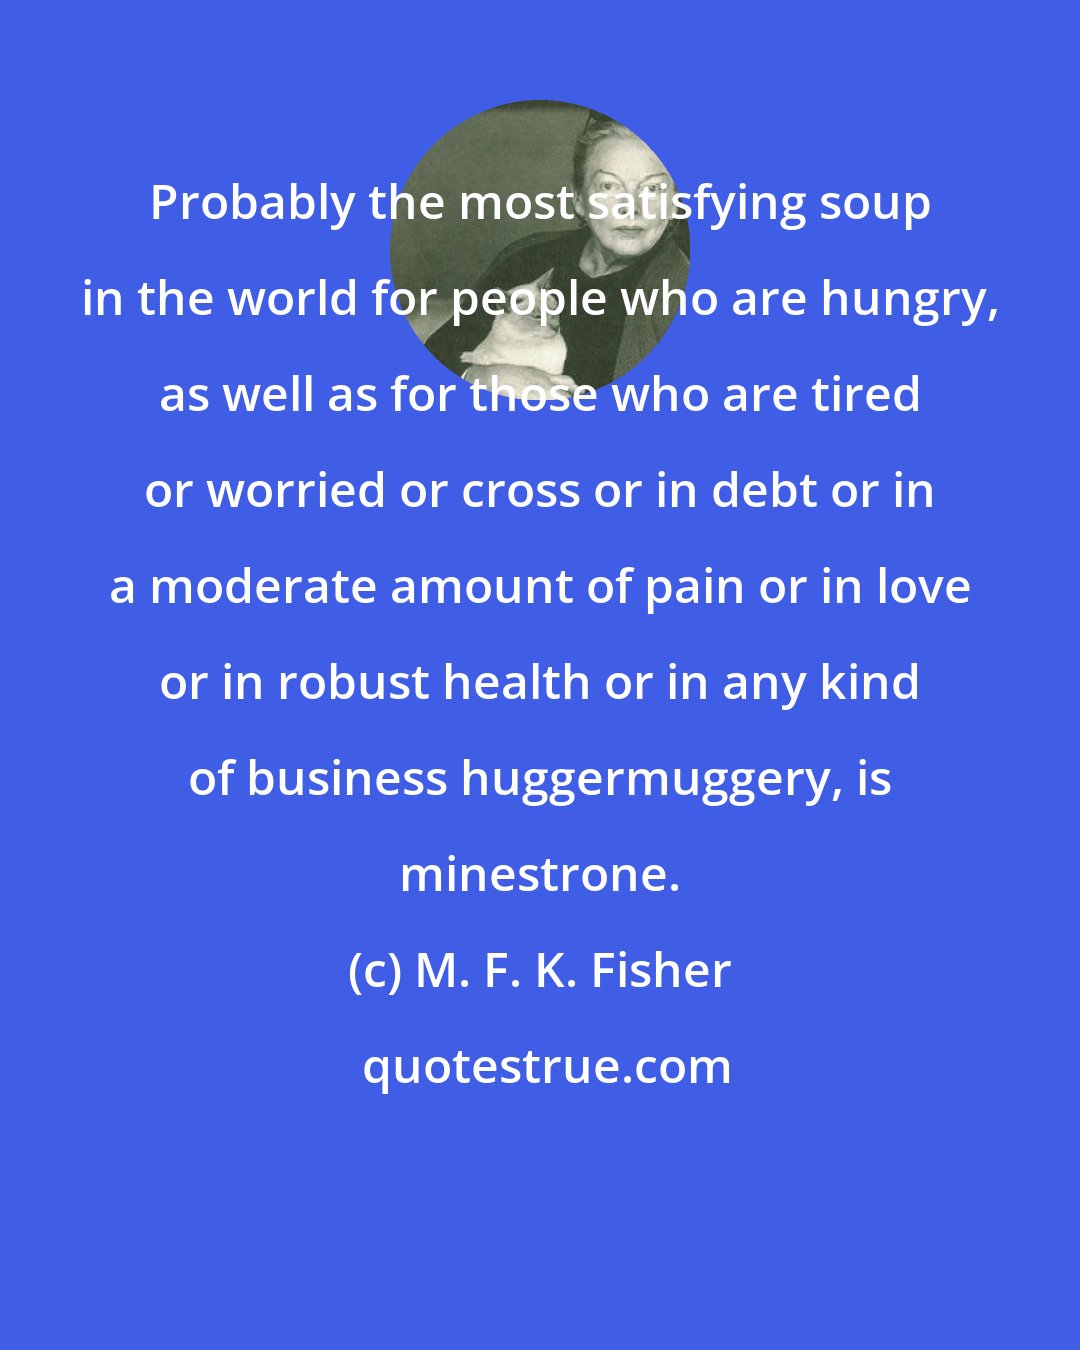 M. F. K. Fisher: Probably the most satisfying soup in the world for people who are hungry, as well as for those who are tired or worried or cross or in debt or in a moderate amount of pain or in love or in robust health or in any kind of business huggermuggery, is minestrone.